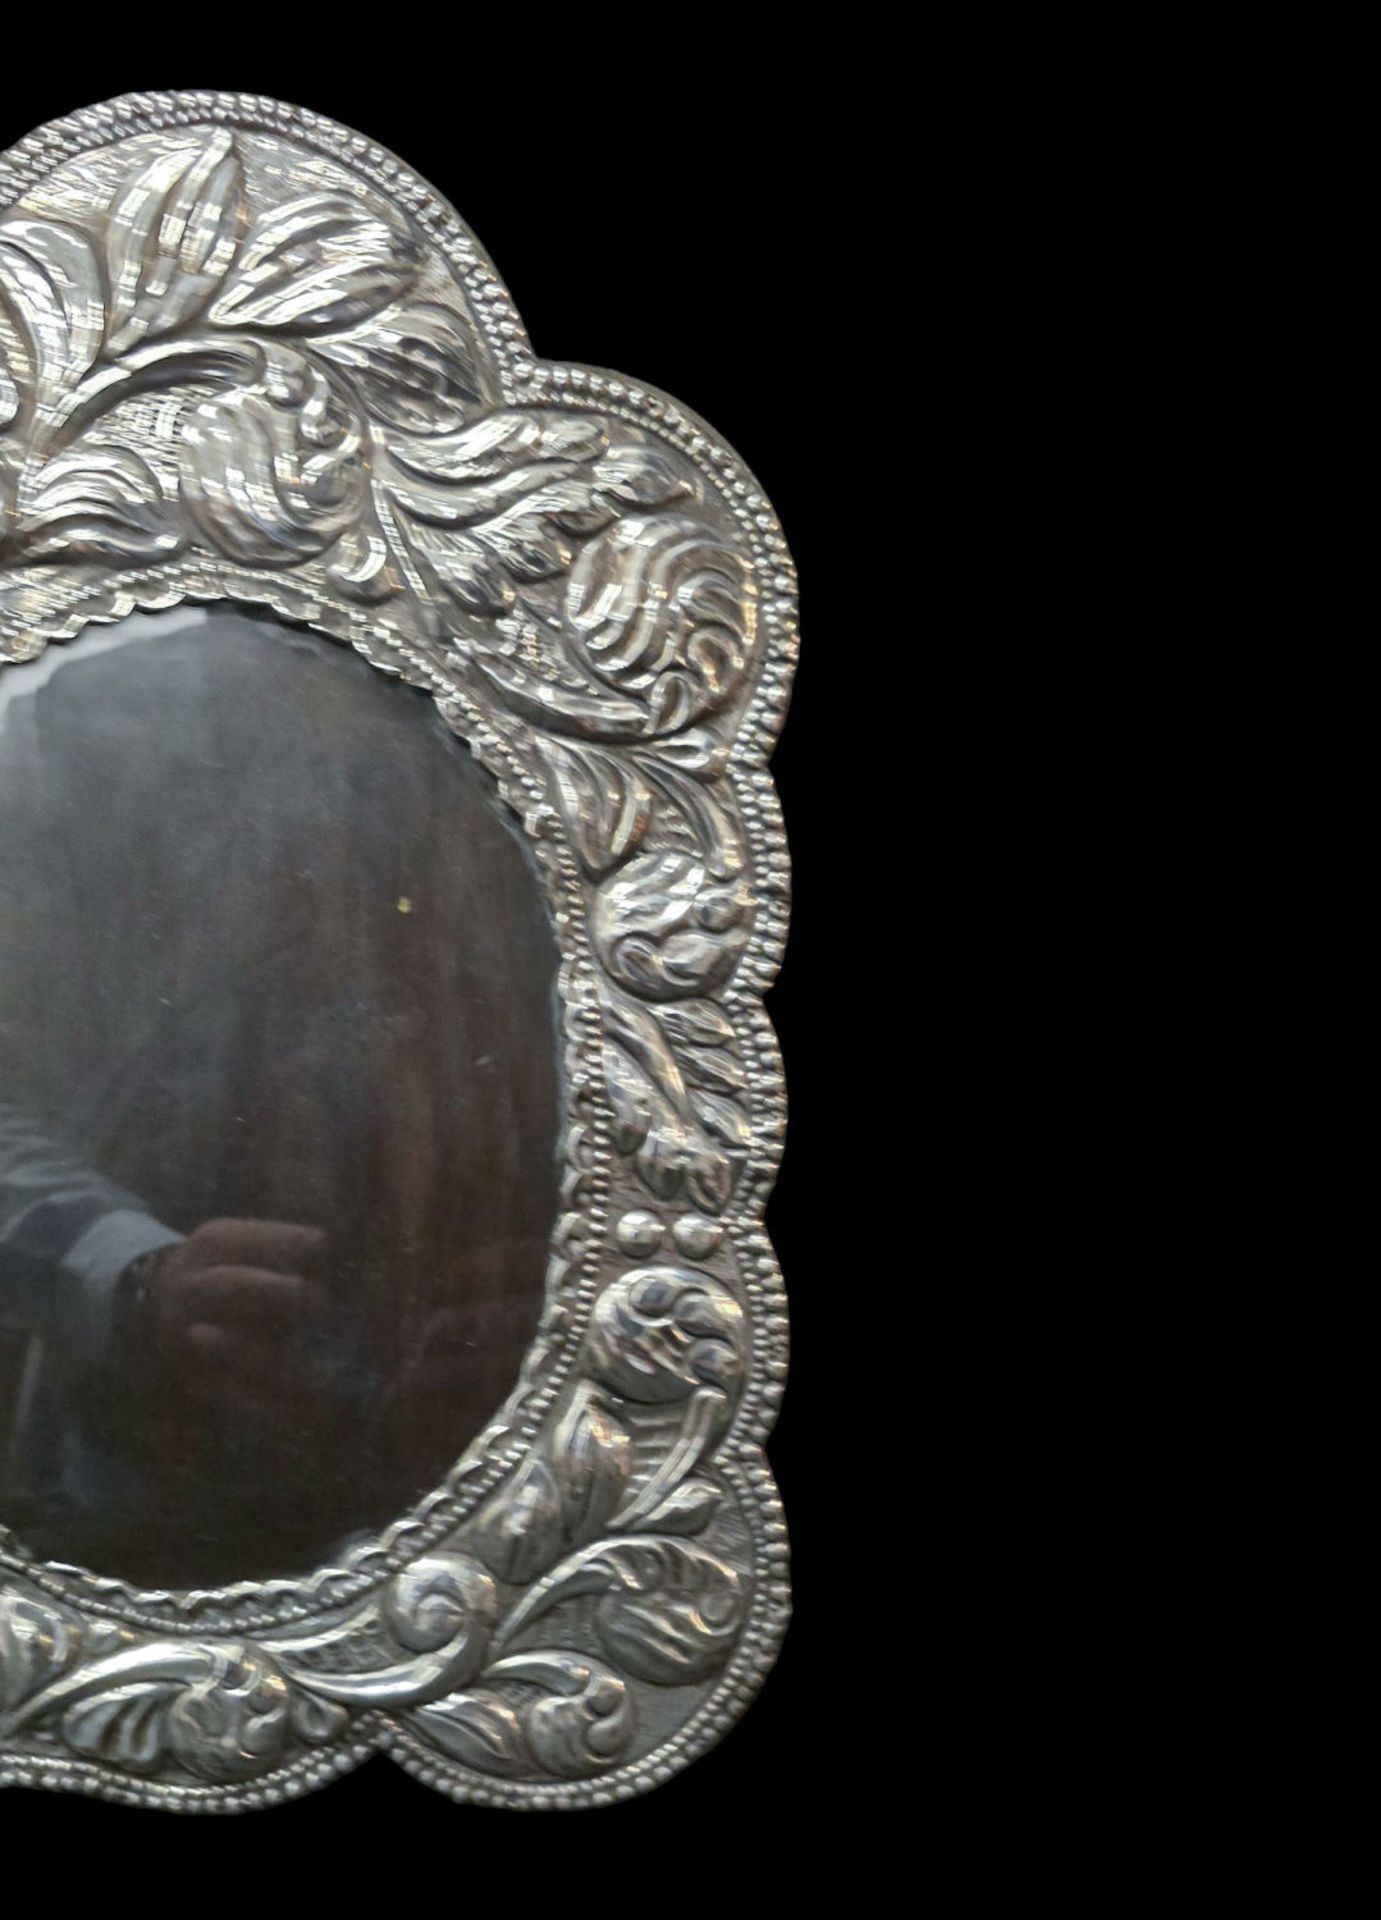 Exquisite large double oval table frame in Peruvian sterling silver, late 19th century - early 20th  - Image 4 of 6